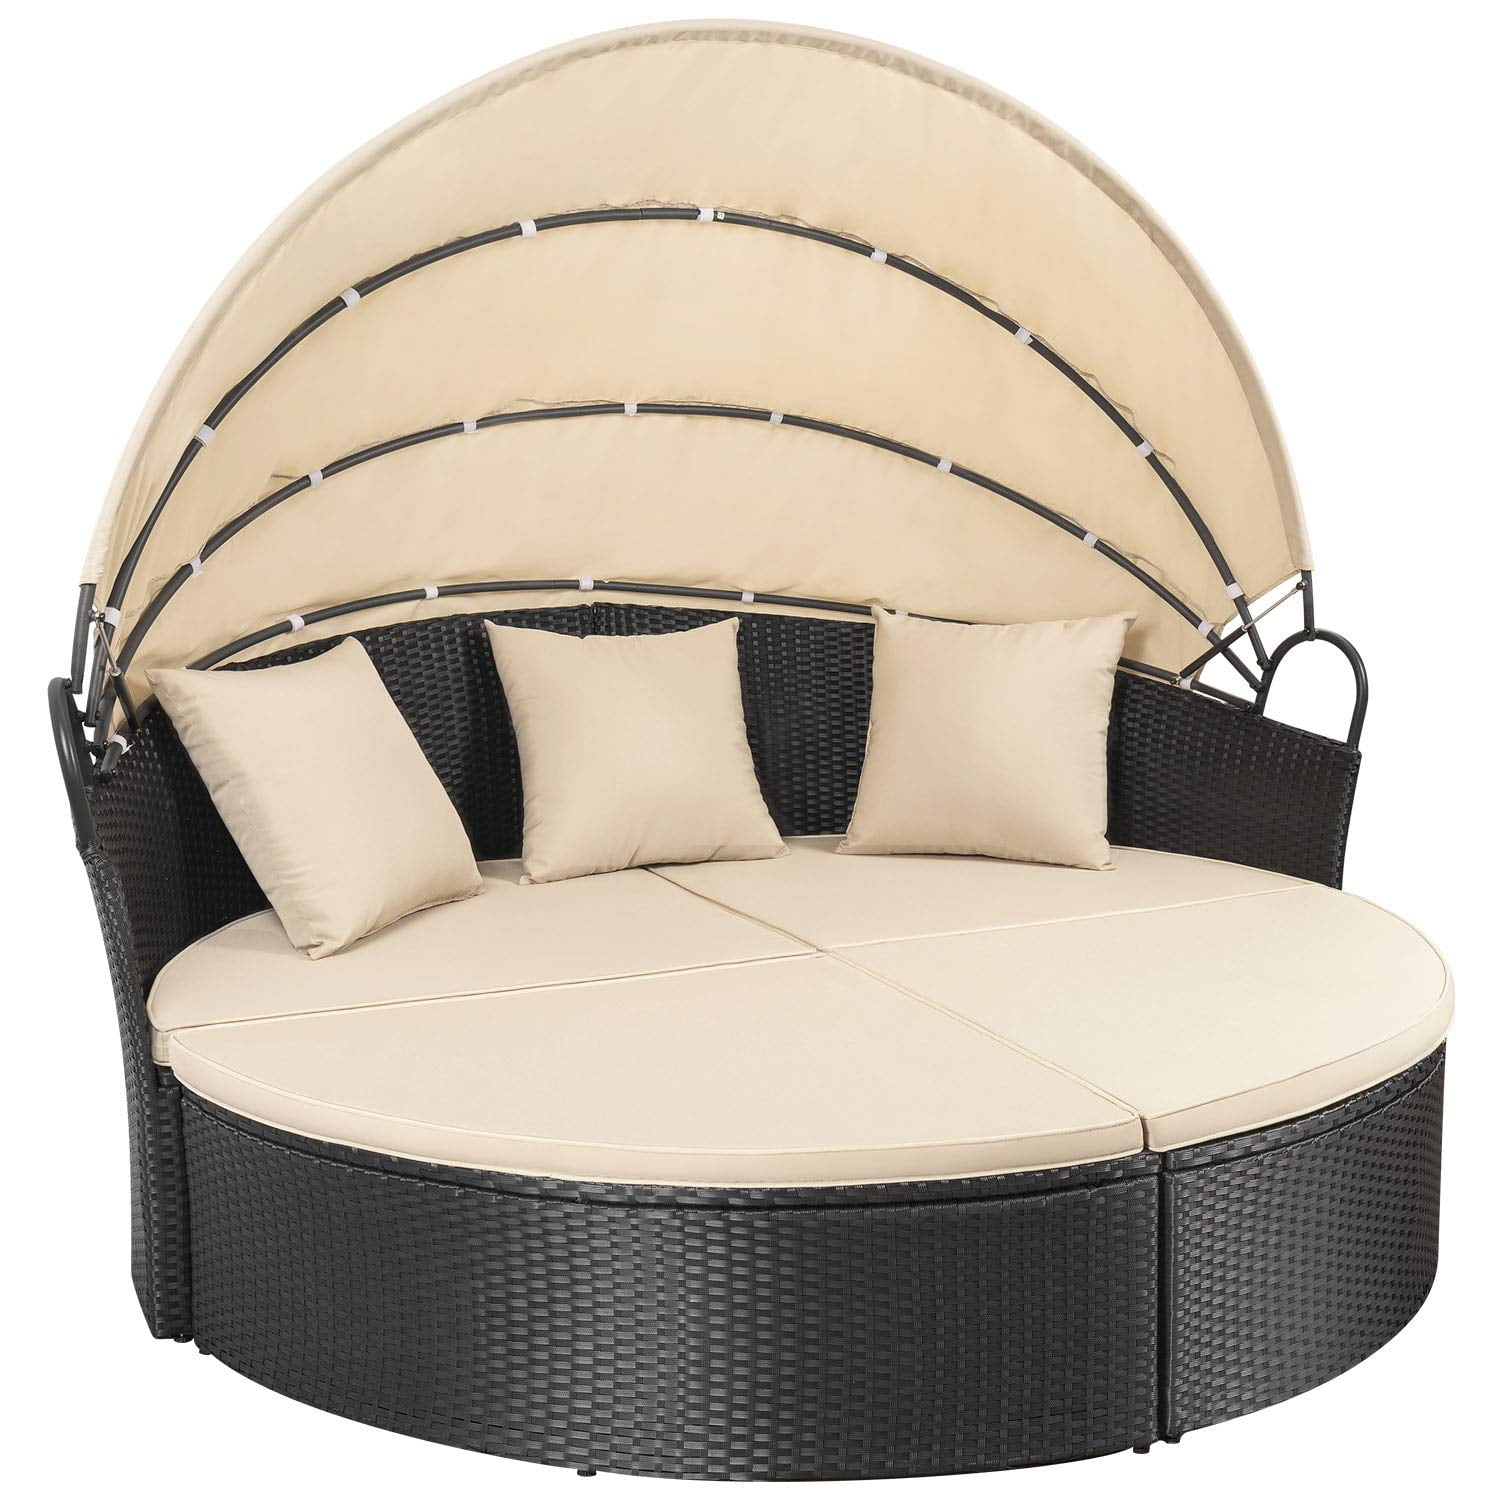 Walnew Outdoor Patio Round Daybed With, Round Patio Lounge Chair Cushions